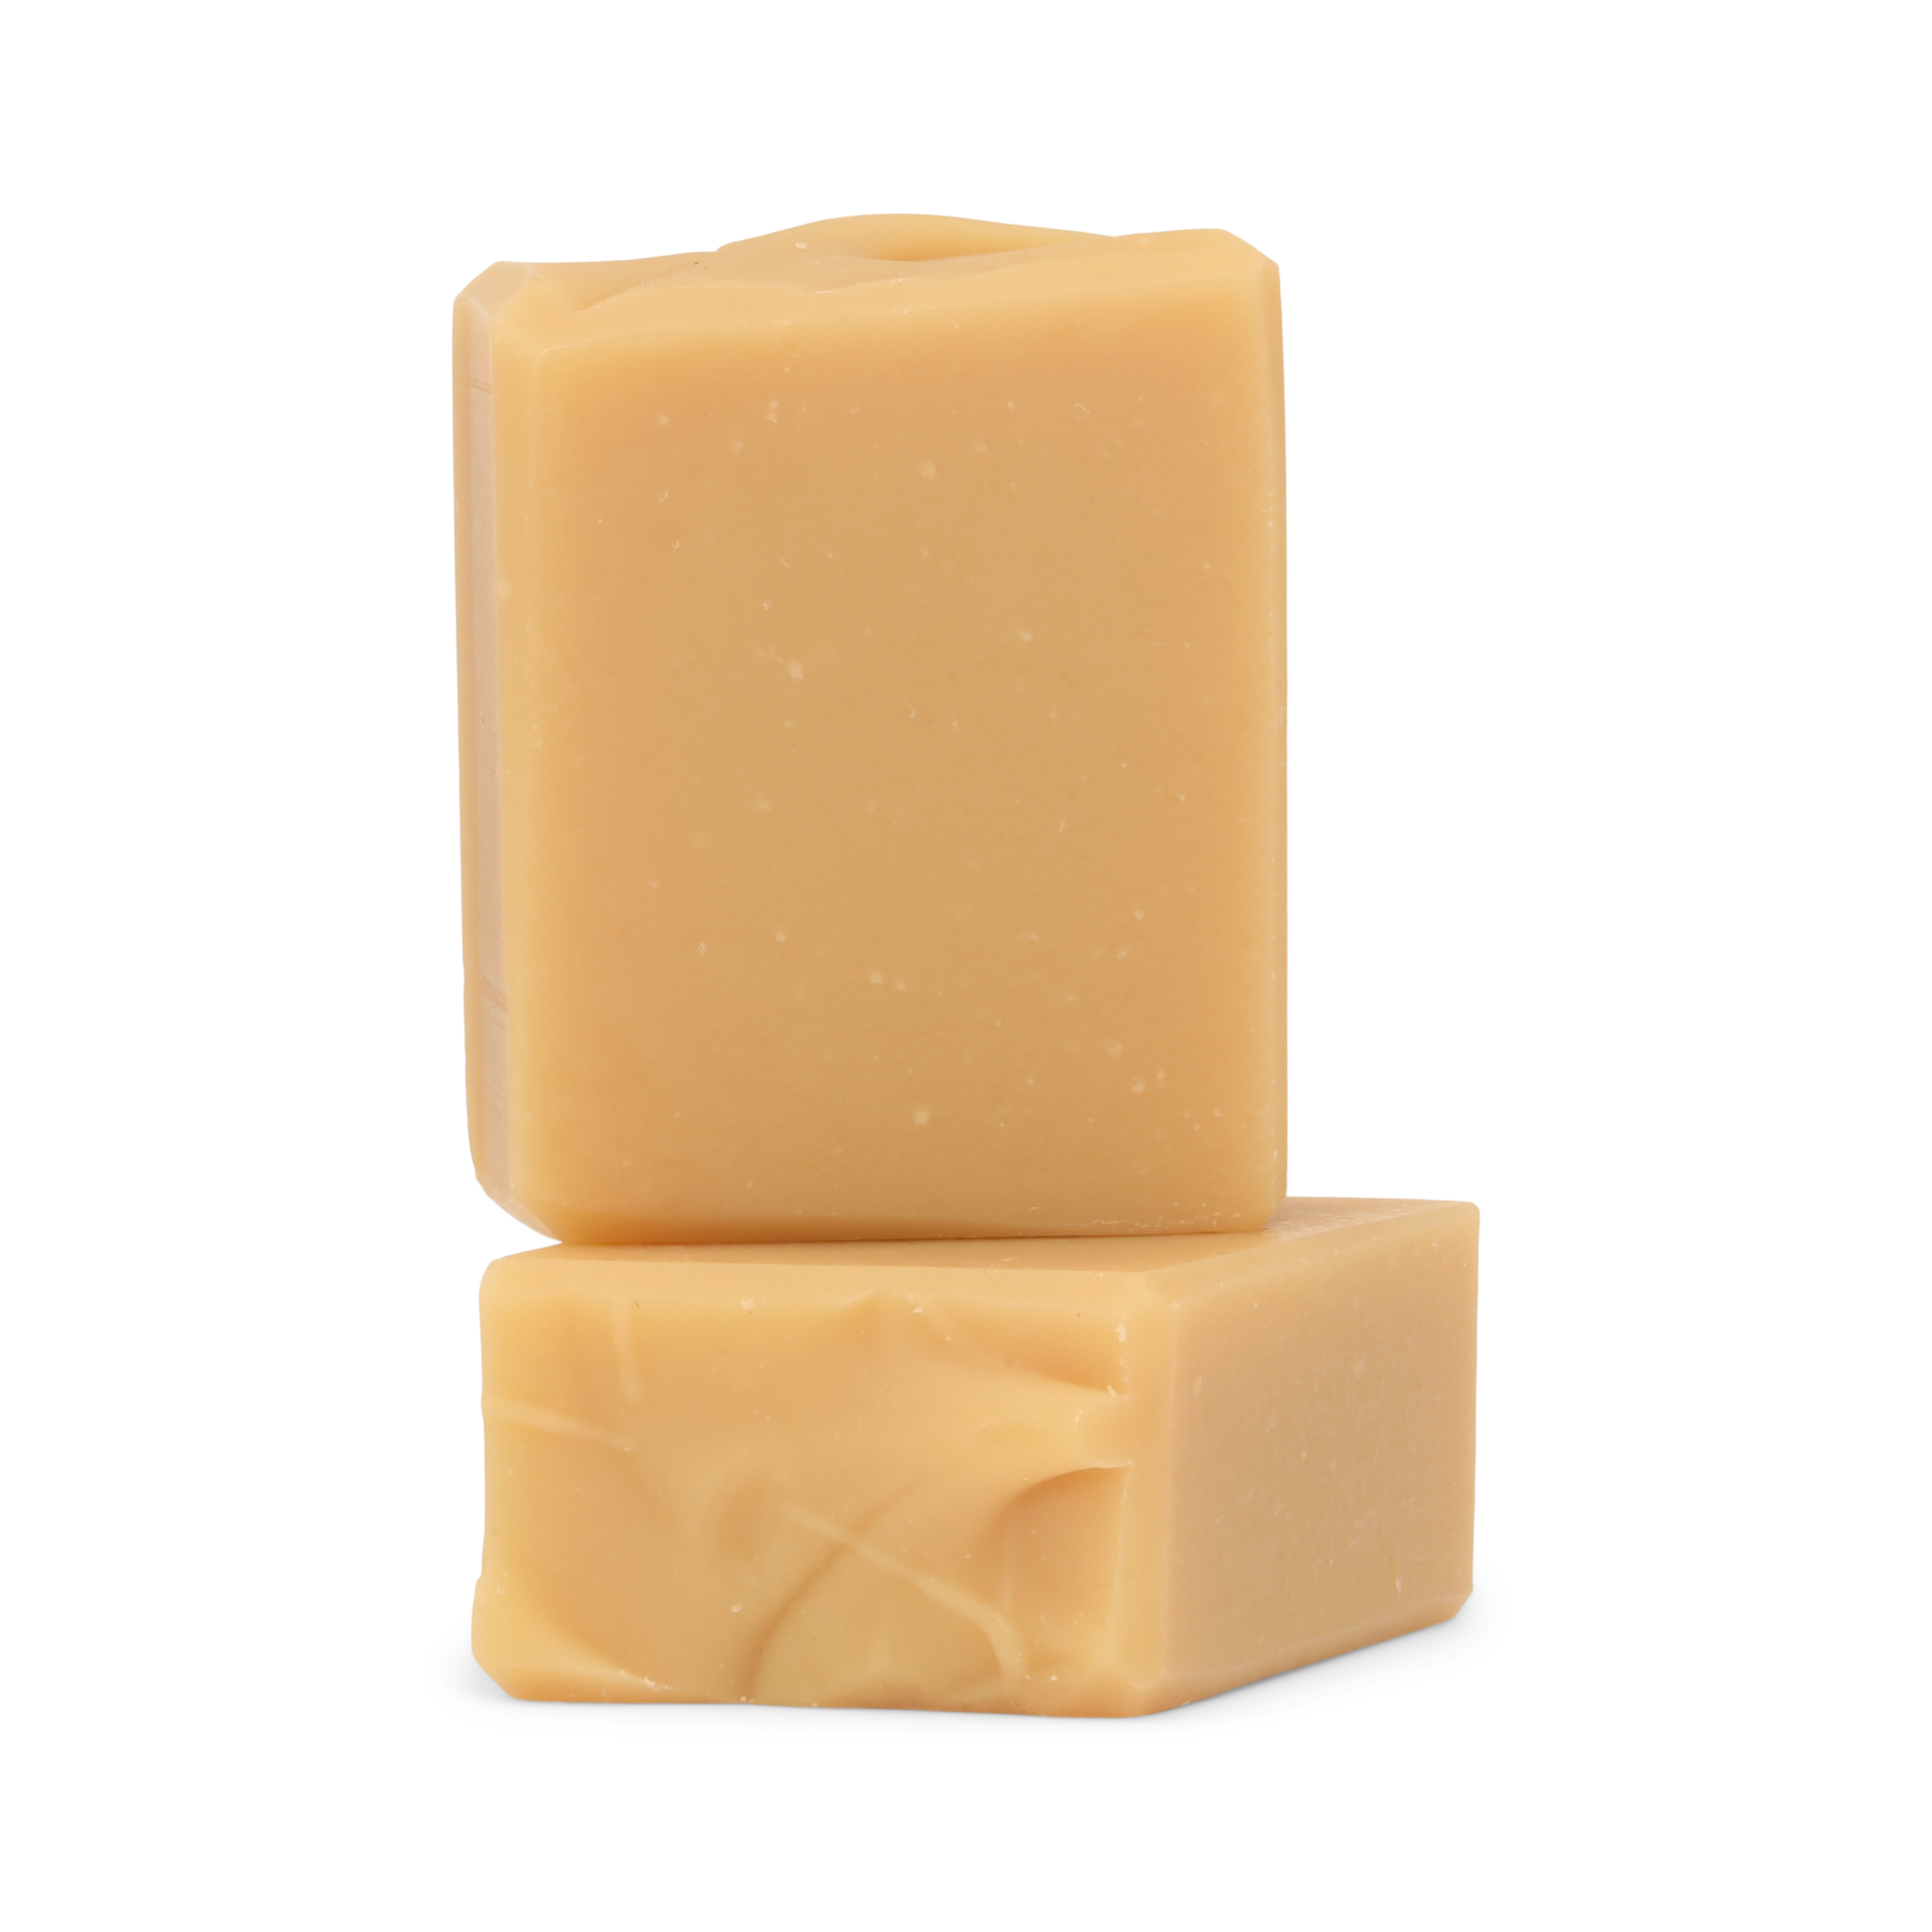 Cannabis bar soap designed to be gentle on sensitive skin, with nourishing coconut & avocado oils